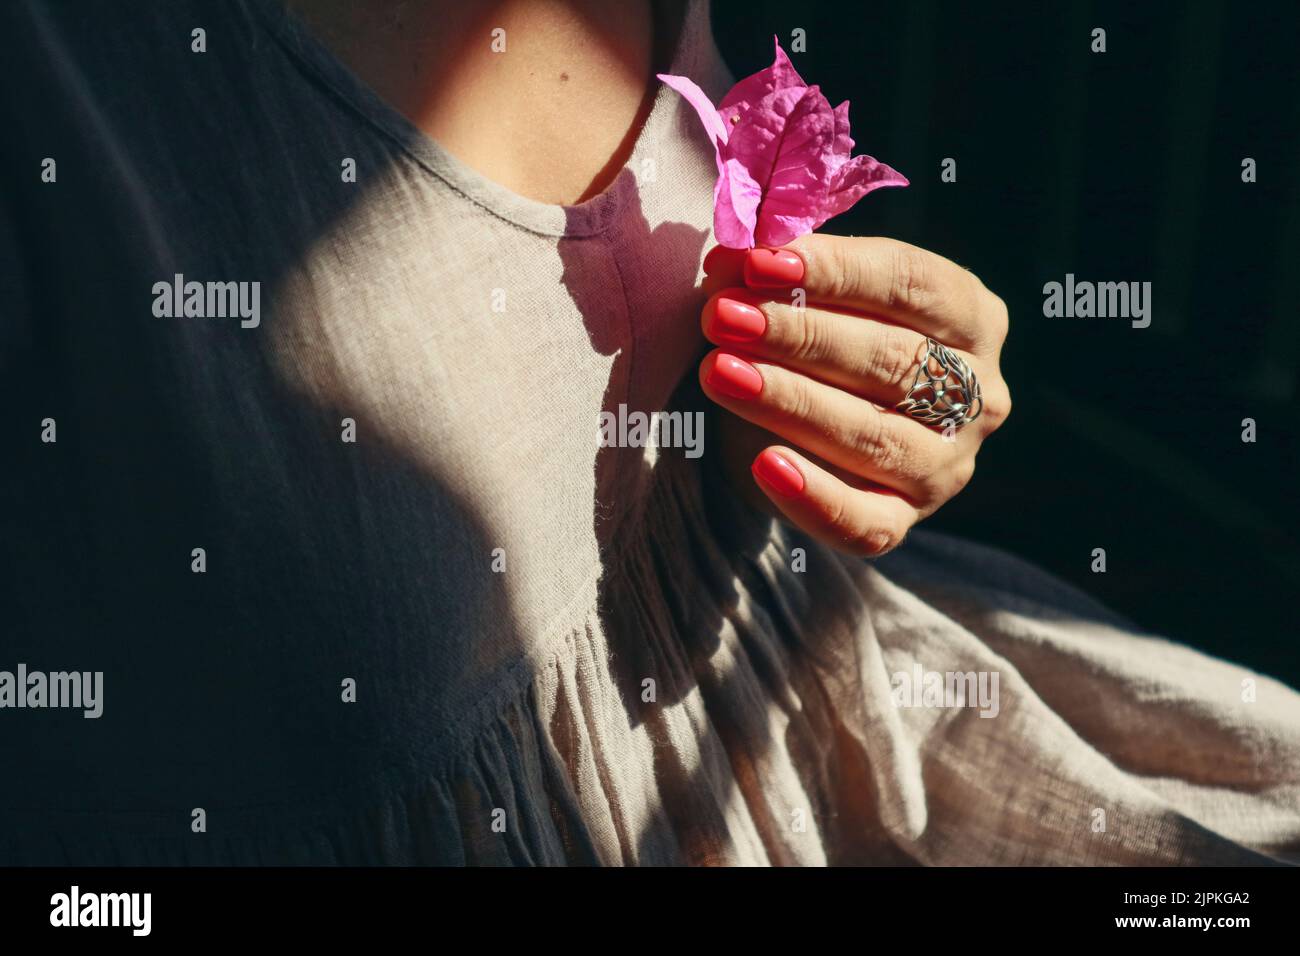 Female hands with red shellac manicure on nails hold Bougainvill Stock Photo